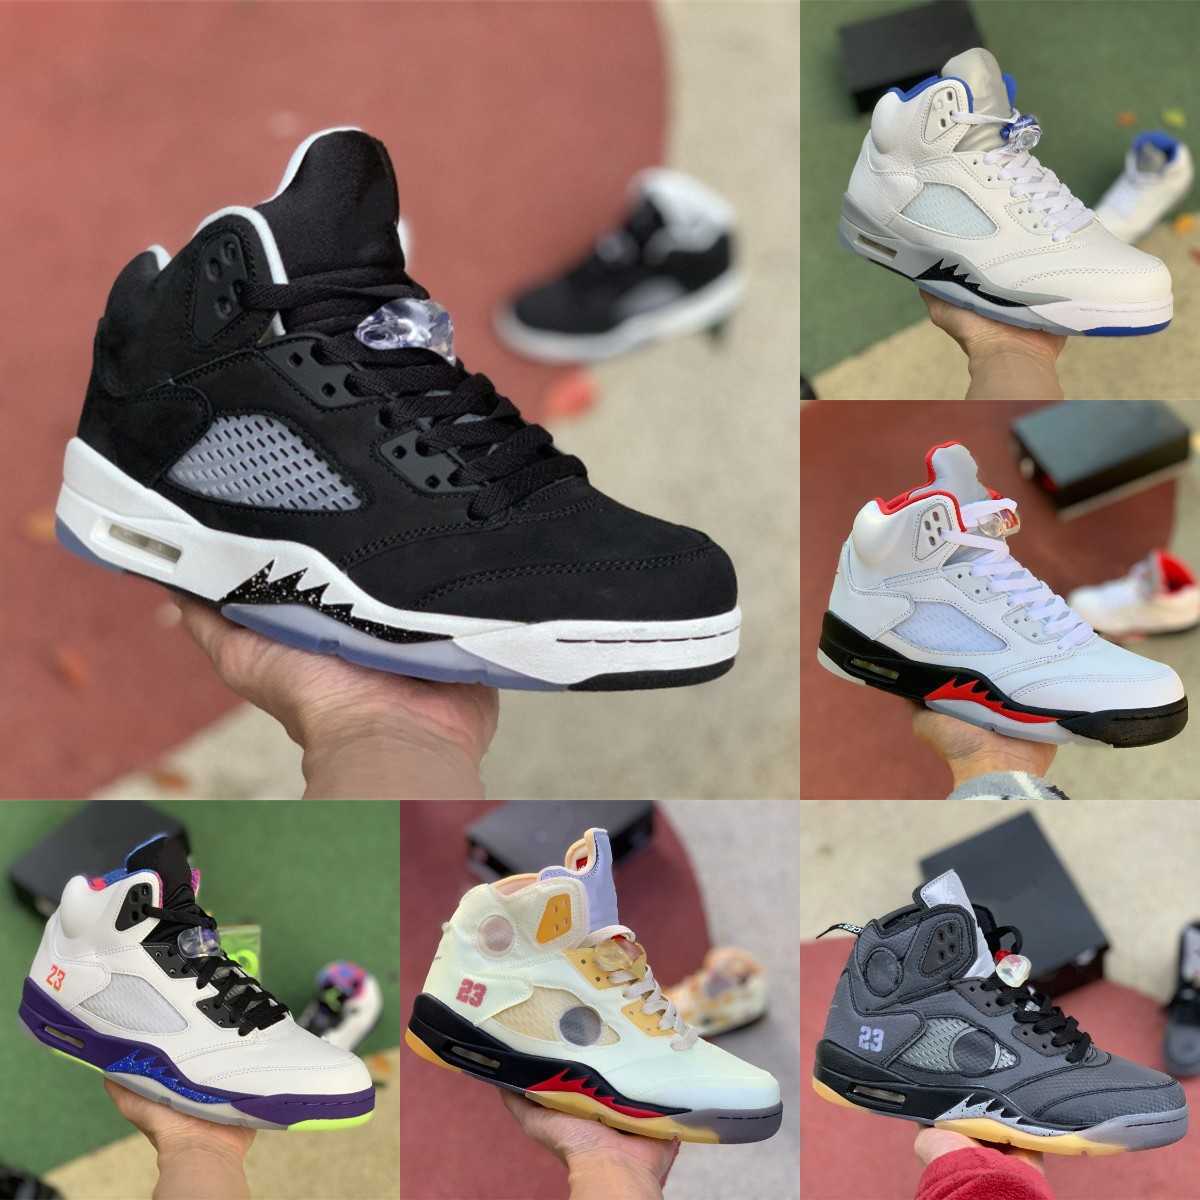 

Jumpman What The 5 5s High Basketball Shoes Mens Sail Stealth 2.0 Raging Bull Red TOP 3 Muslin Oreo Hyper Royal Wings Oregon Ice Bred Alternate Bel Trainer Sneakers P558, Please contact us